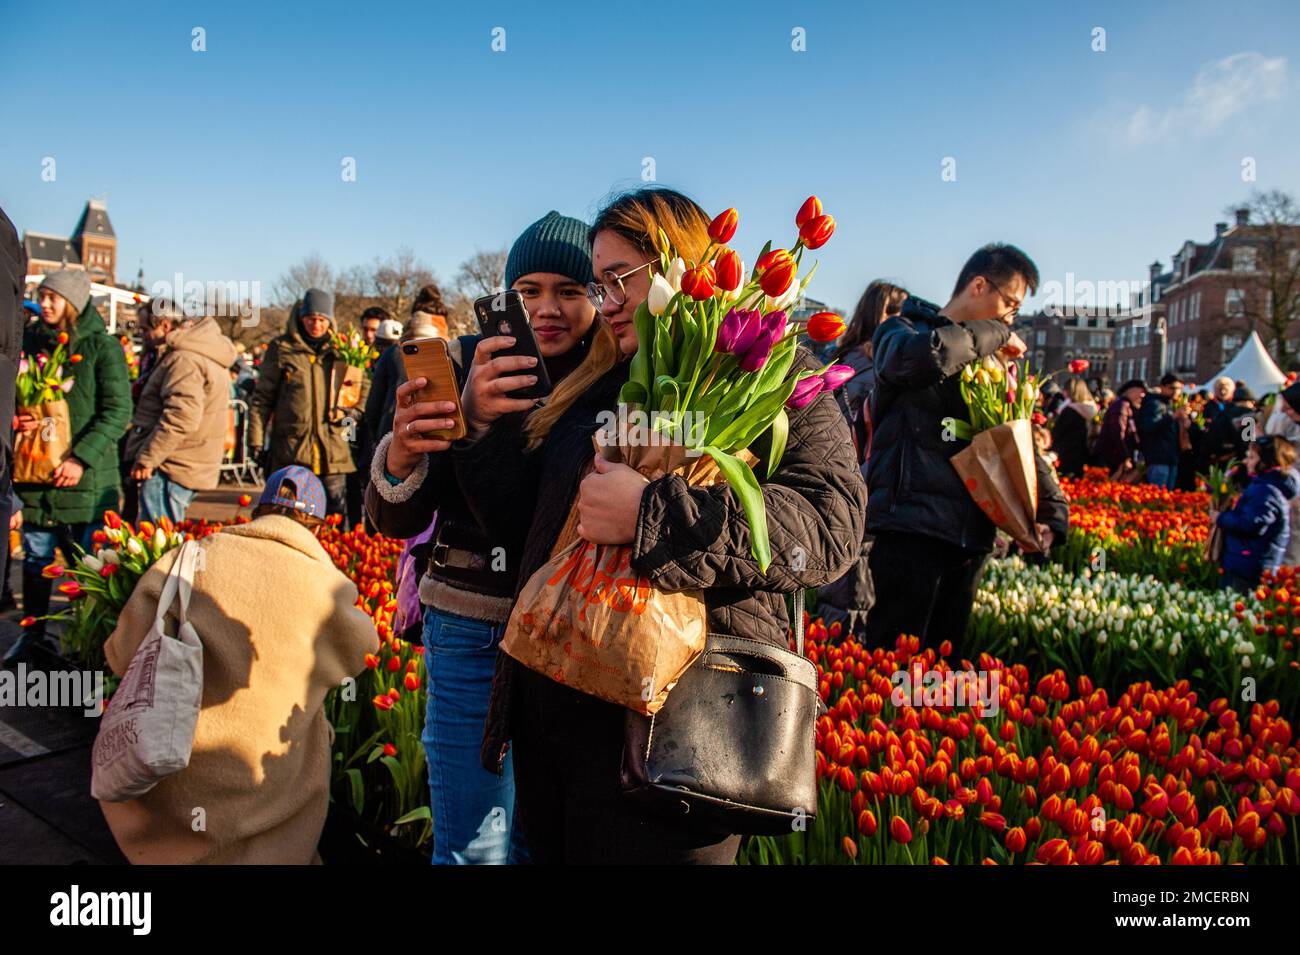 Two women are seen taking a selfie with their tulips. Each year on the 3rd Saturday of January, the National Tulip Day is celebrated in Amsterdam. Dutch tulip growers built a huge picking garden with more than 200,000 colorful tulips at the Museumplein in Amsterdam. Visitors are allowed to pick tulips for free. The event was opened by Olympic skating champion, Irene Schouten. Prior to the opening, she christened a new tulip: Tulipa 'Dutch Pearl' as a reference to the world - famous painting 'The girl with a pearl earring' by Johannes Vermeer. Stock Photo